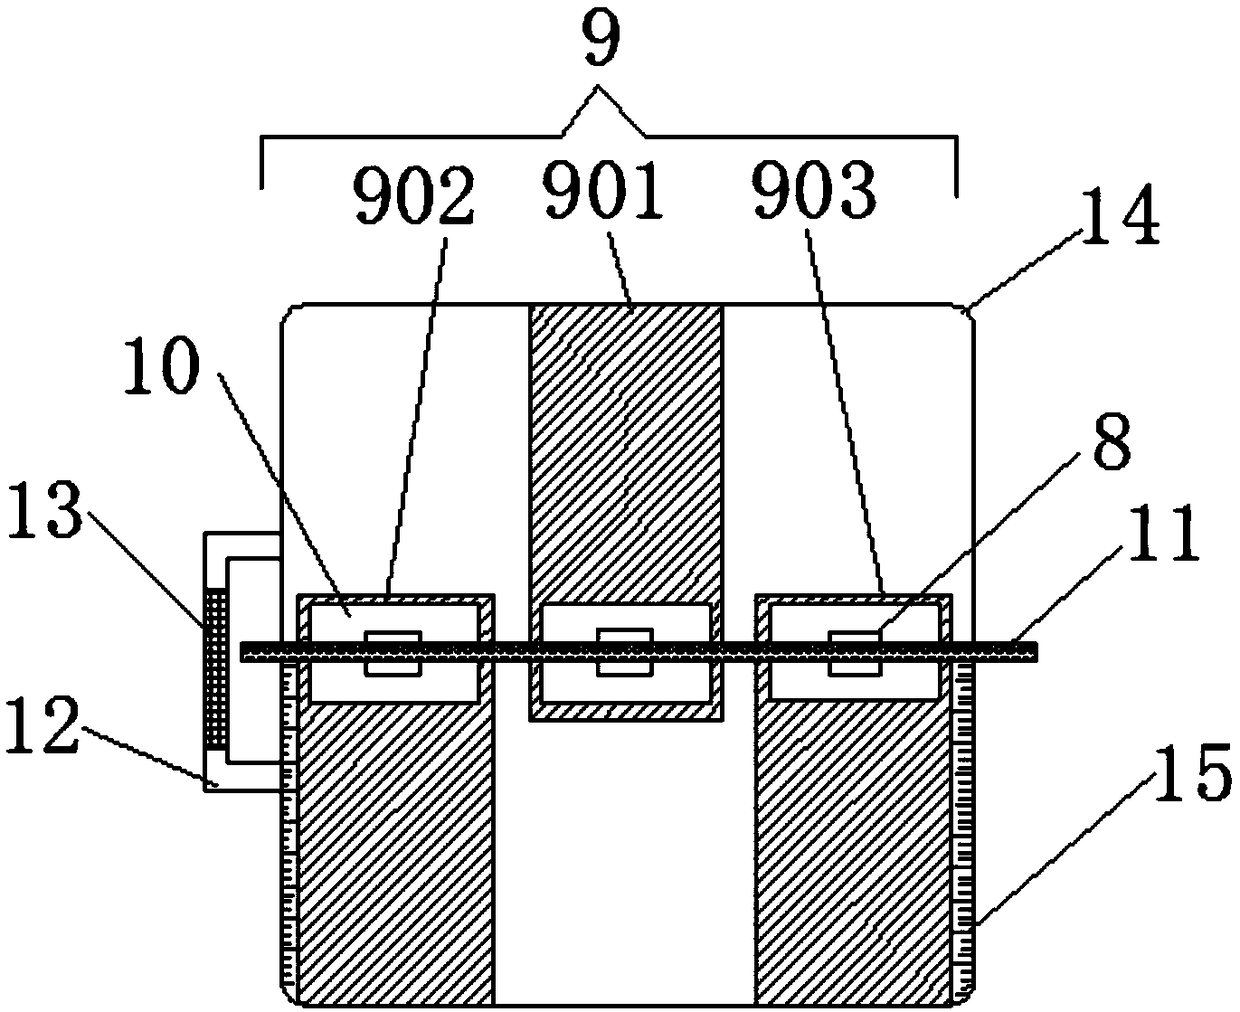 Steel bar bending device for engineering construction